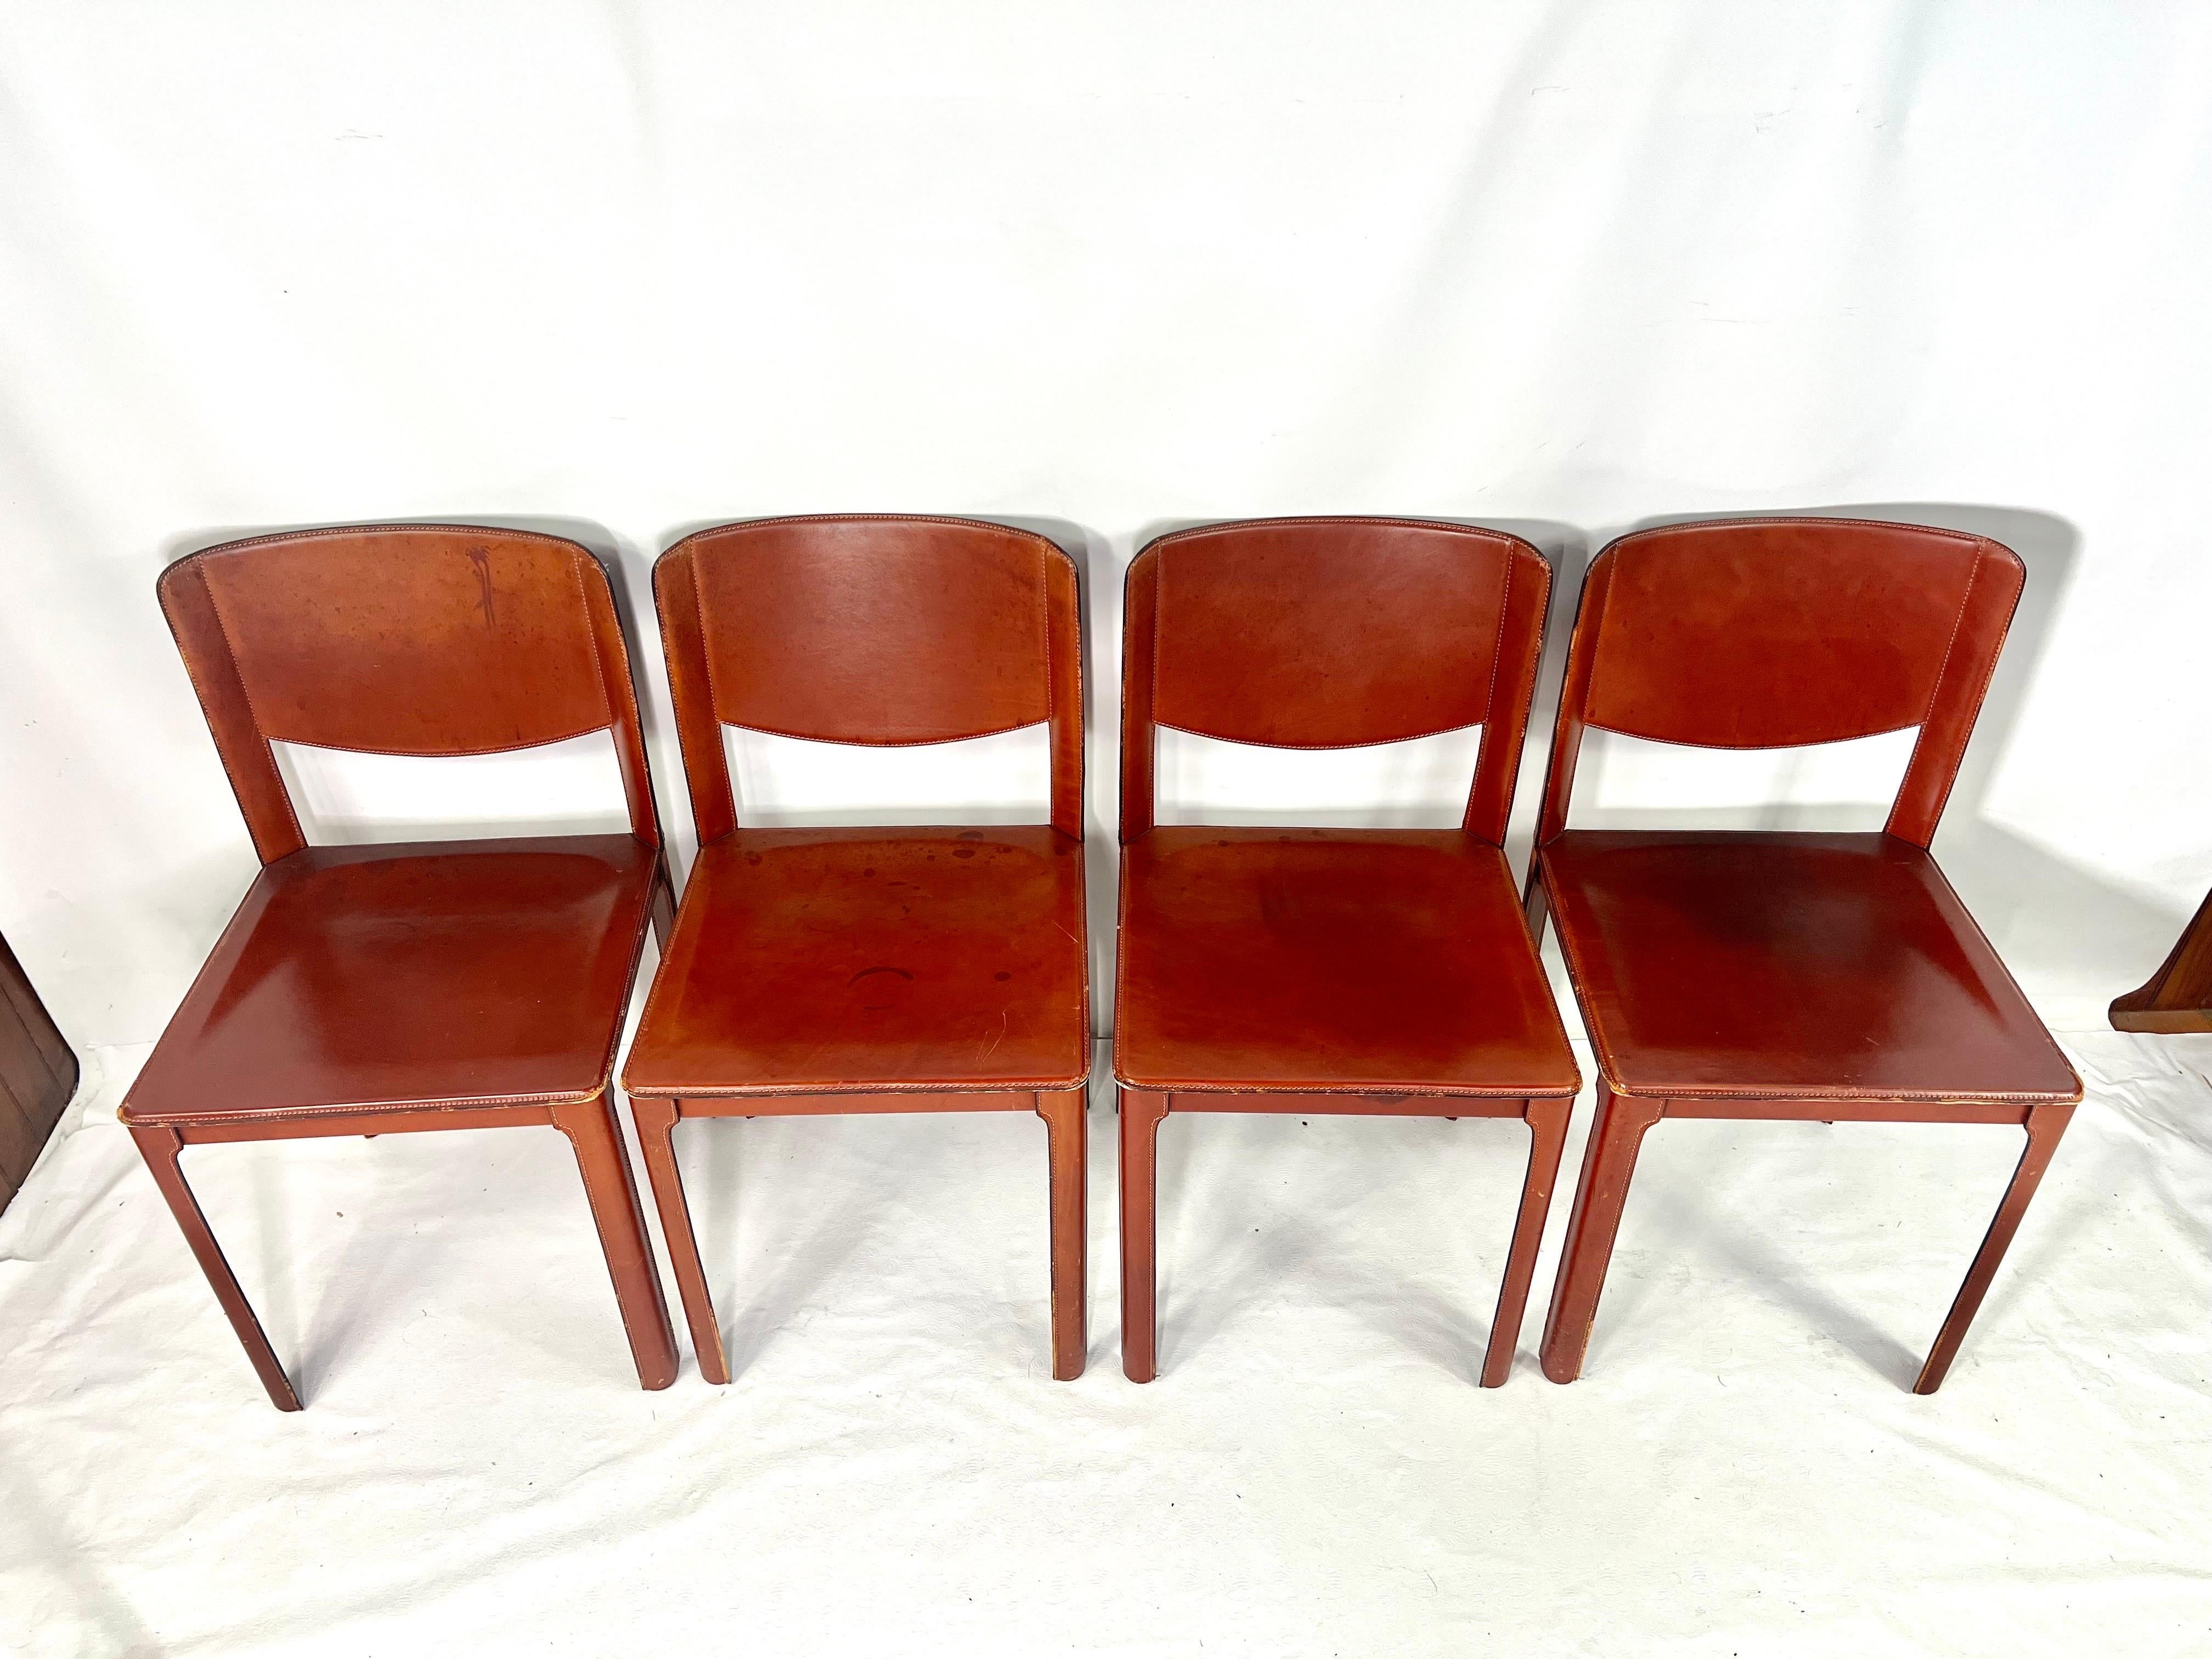 This is a very nice set of four chairs in Oxford red made by Matteo Grassi. The chairs have very nice patina from age.